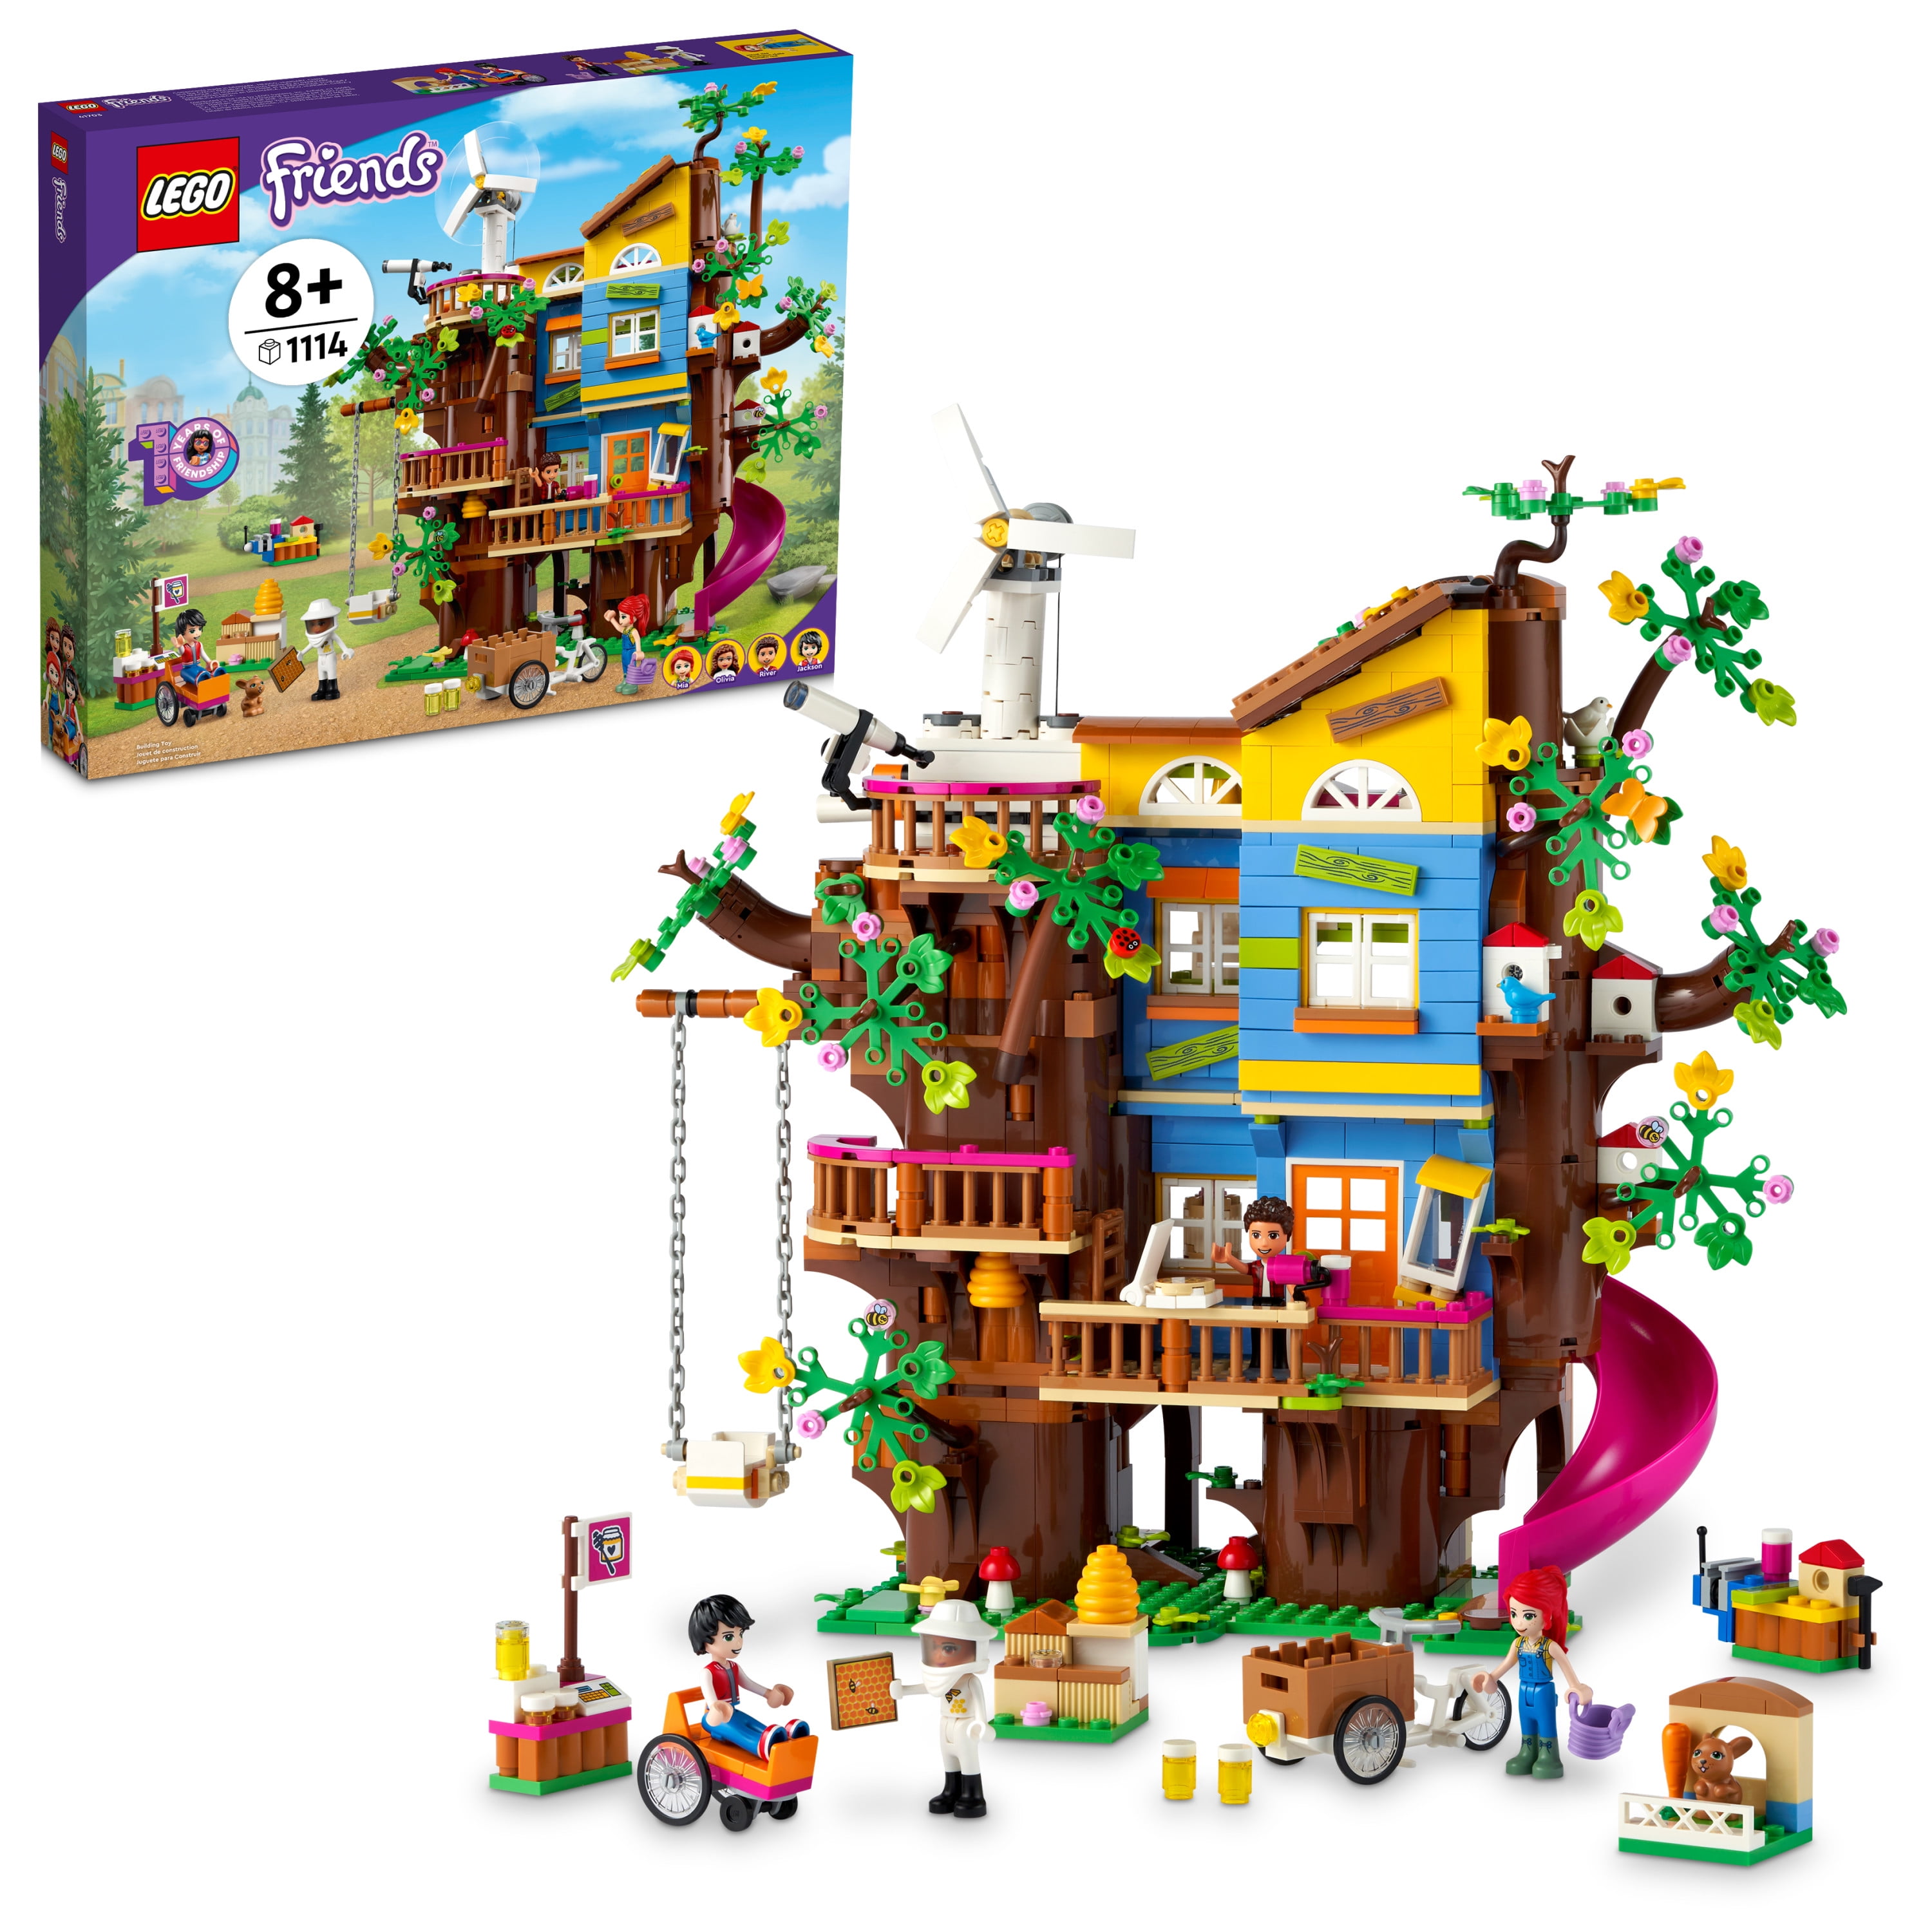 41703 LEGO Friends Friendship Tree House Playset with Figures 1114 Pieces Age 8+